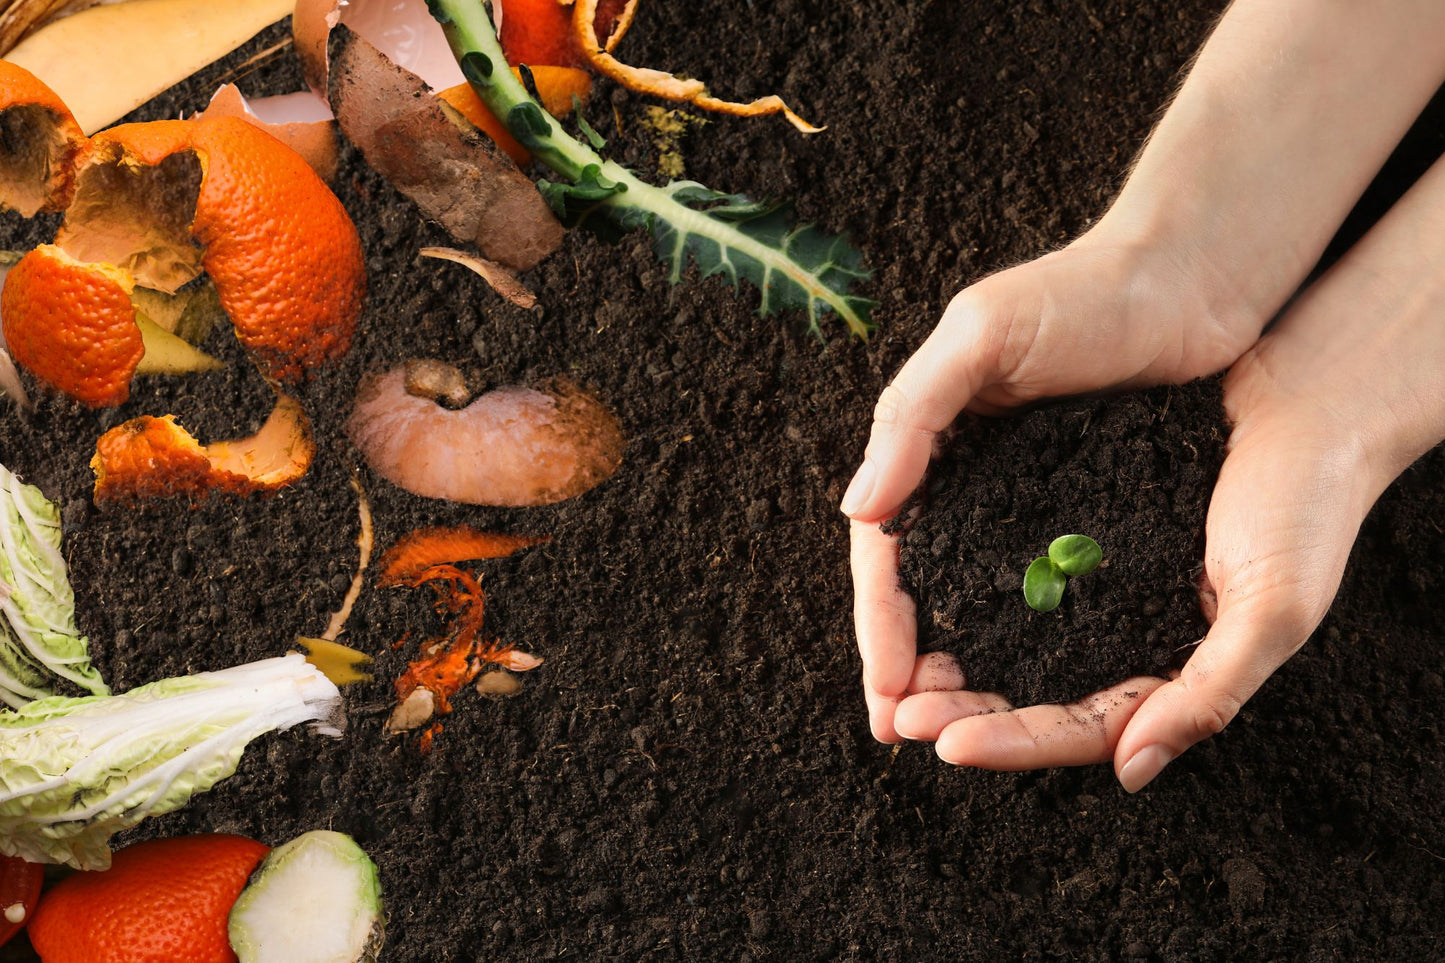 Your Guide to Composting